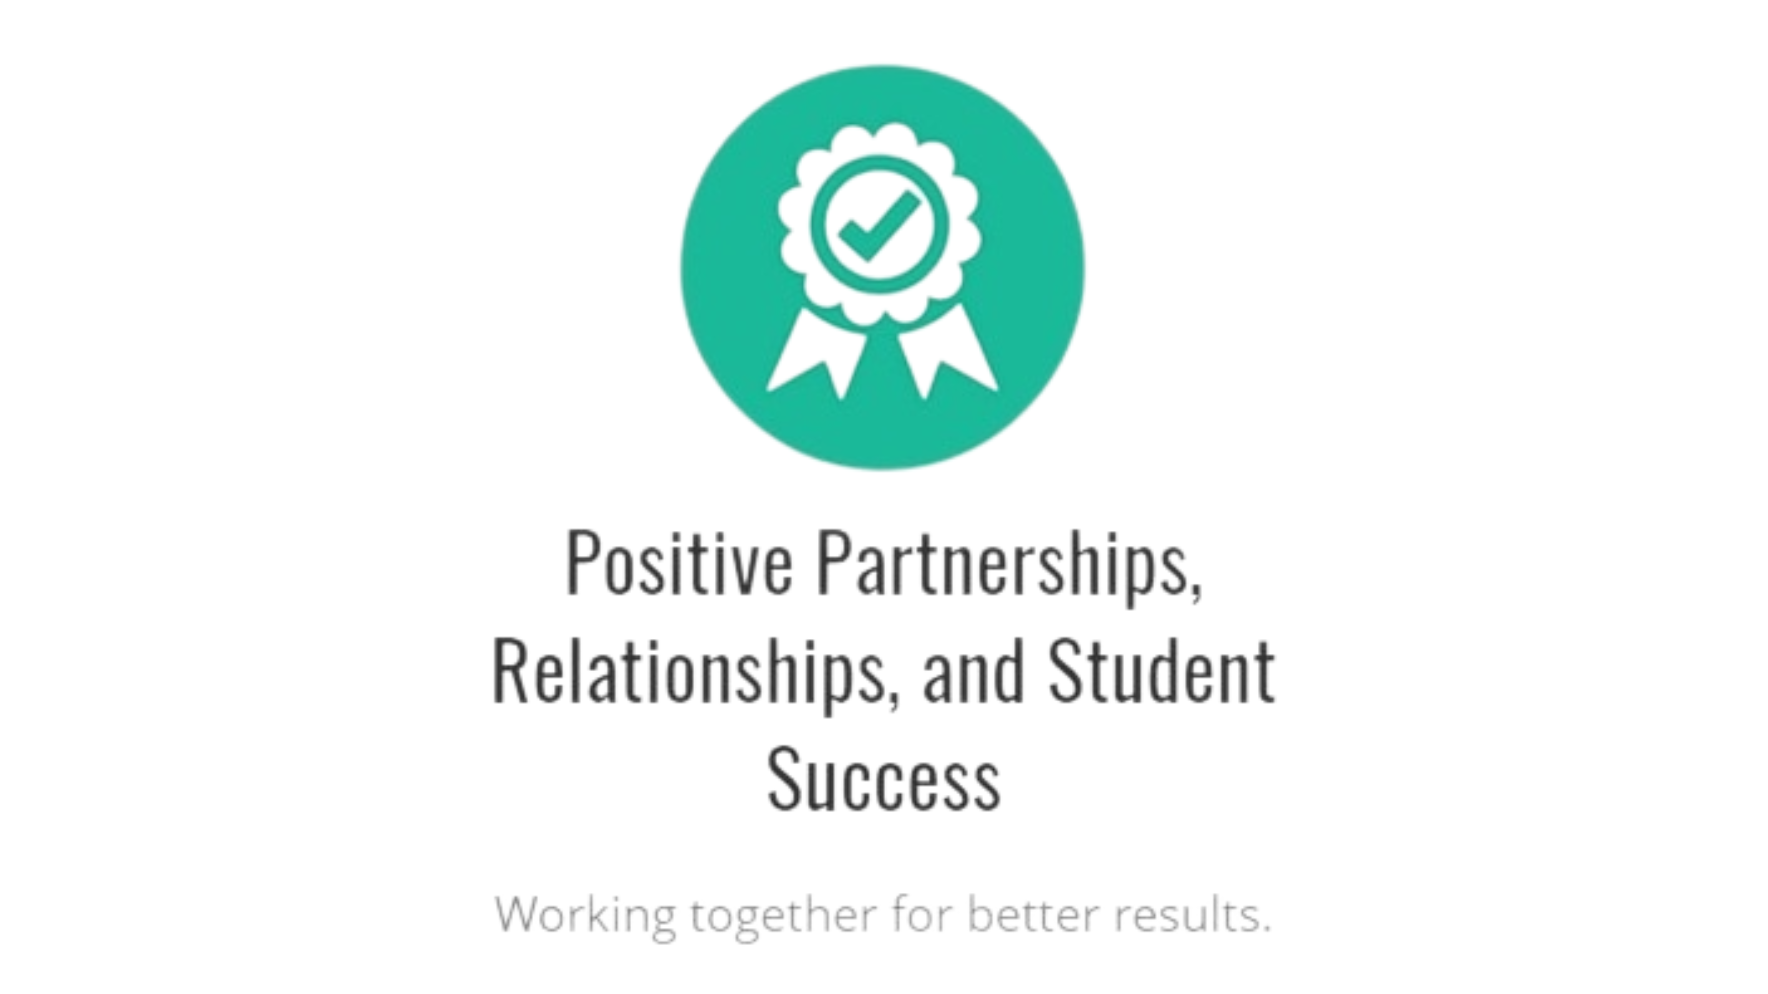 Positive Partnerships, Relationships, and Student Success Working together for better results.